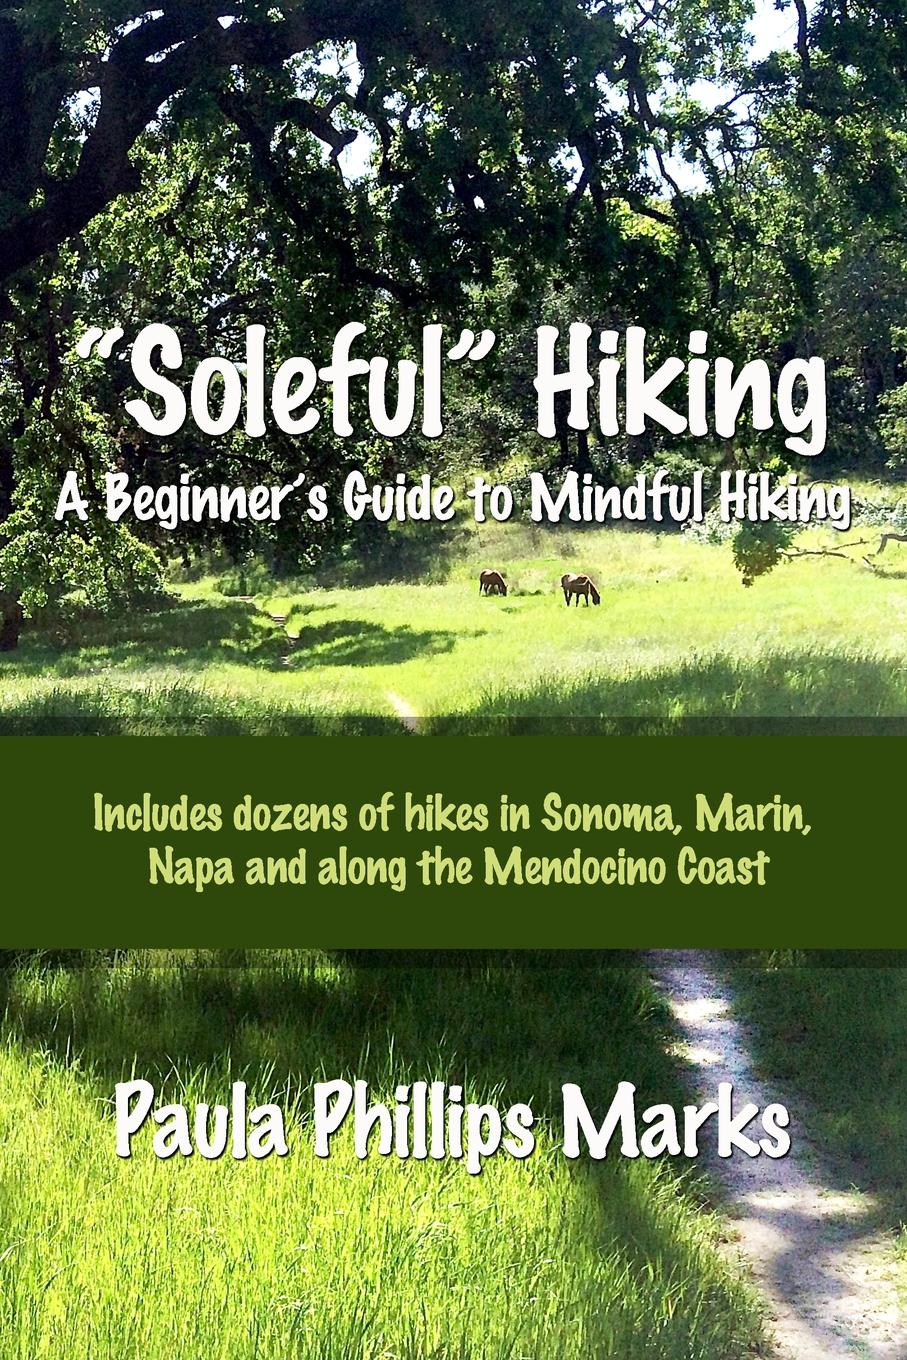 фото "Soleful" Hiking - A Beginner.s Guide to Mindful Hiking